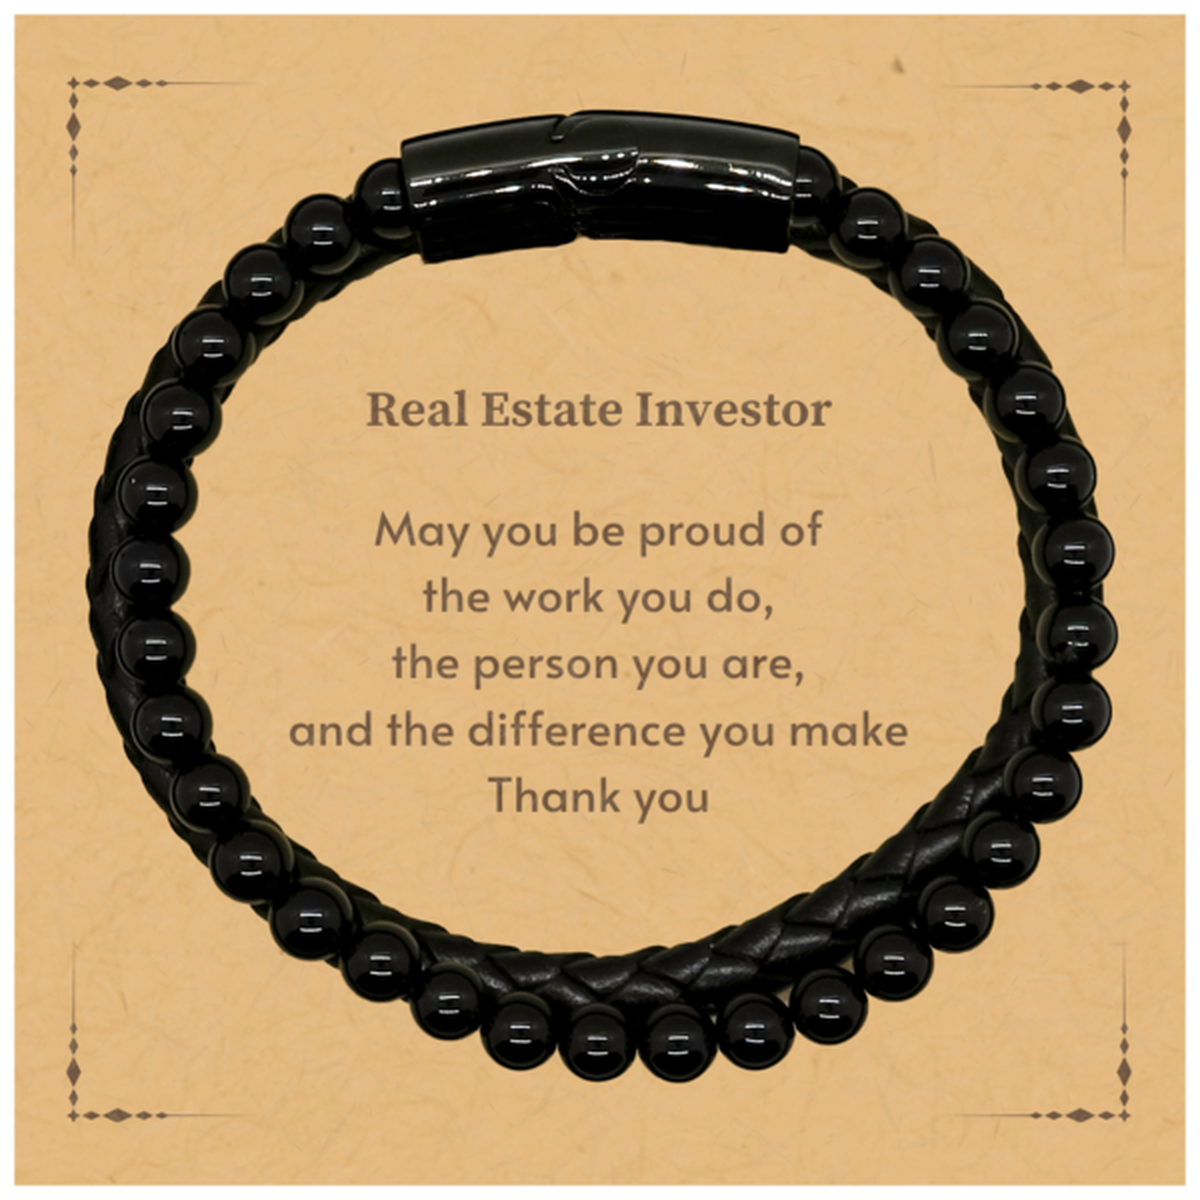 Heartwarming Stone Leather Bracelets Retirement Coworkers Gifts for Real Estate Investor, Real Estate Investor May You be proud of the work you do, the person you are Gifts for Boss Men Women Friends